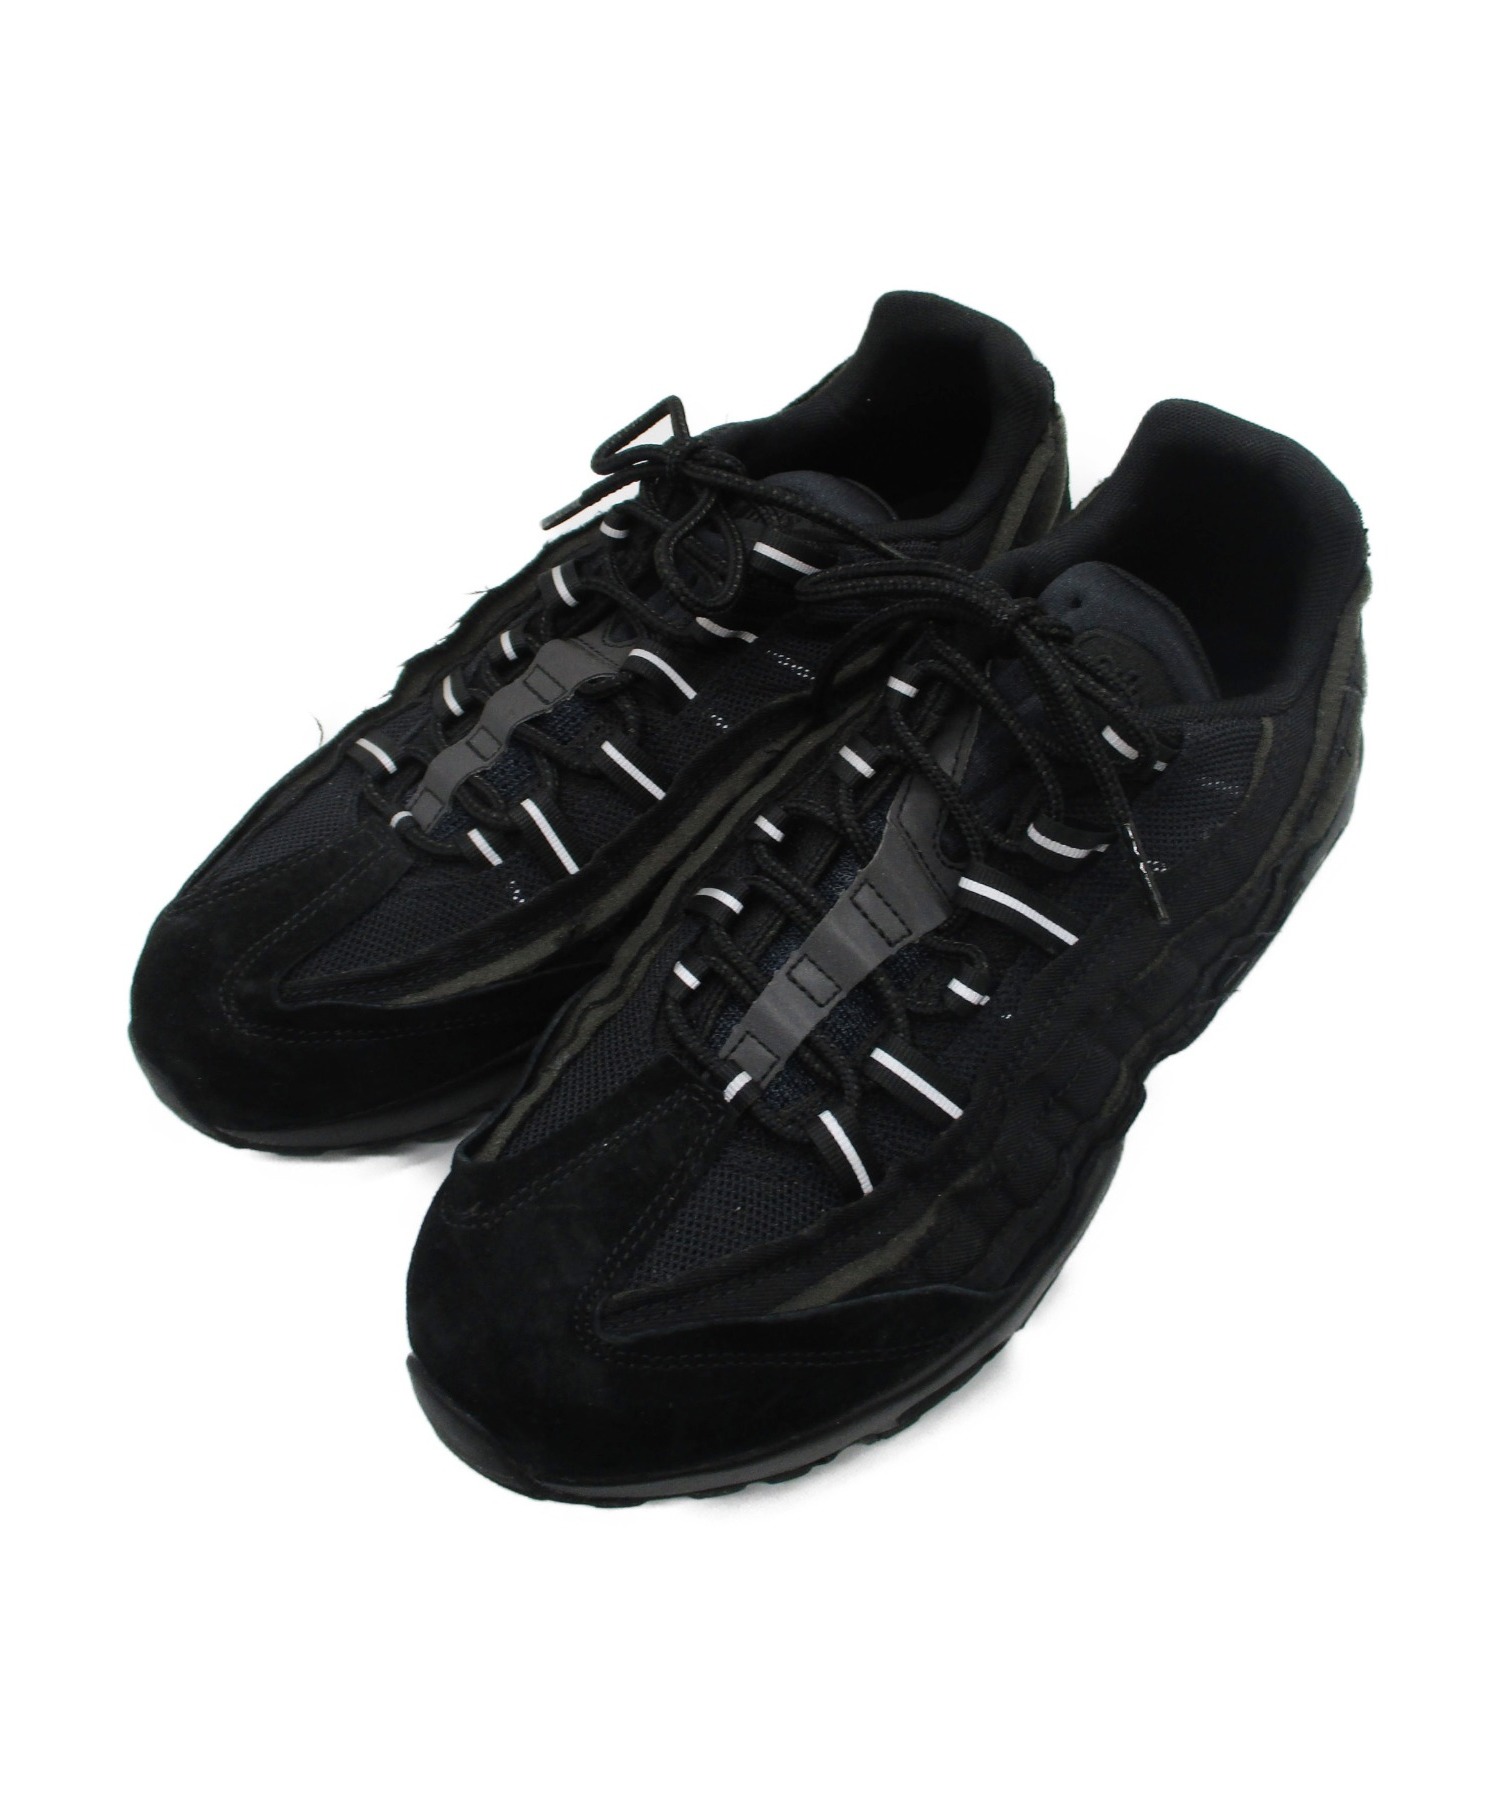 COMME des GARCONS HOMME PLUS - Nike コムデギャルソン air max 95の+